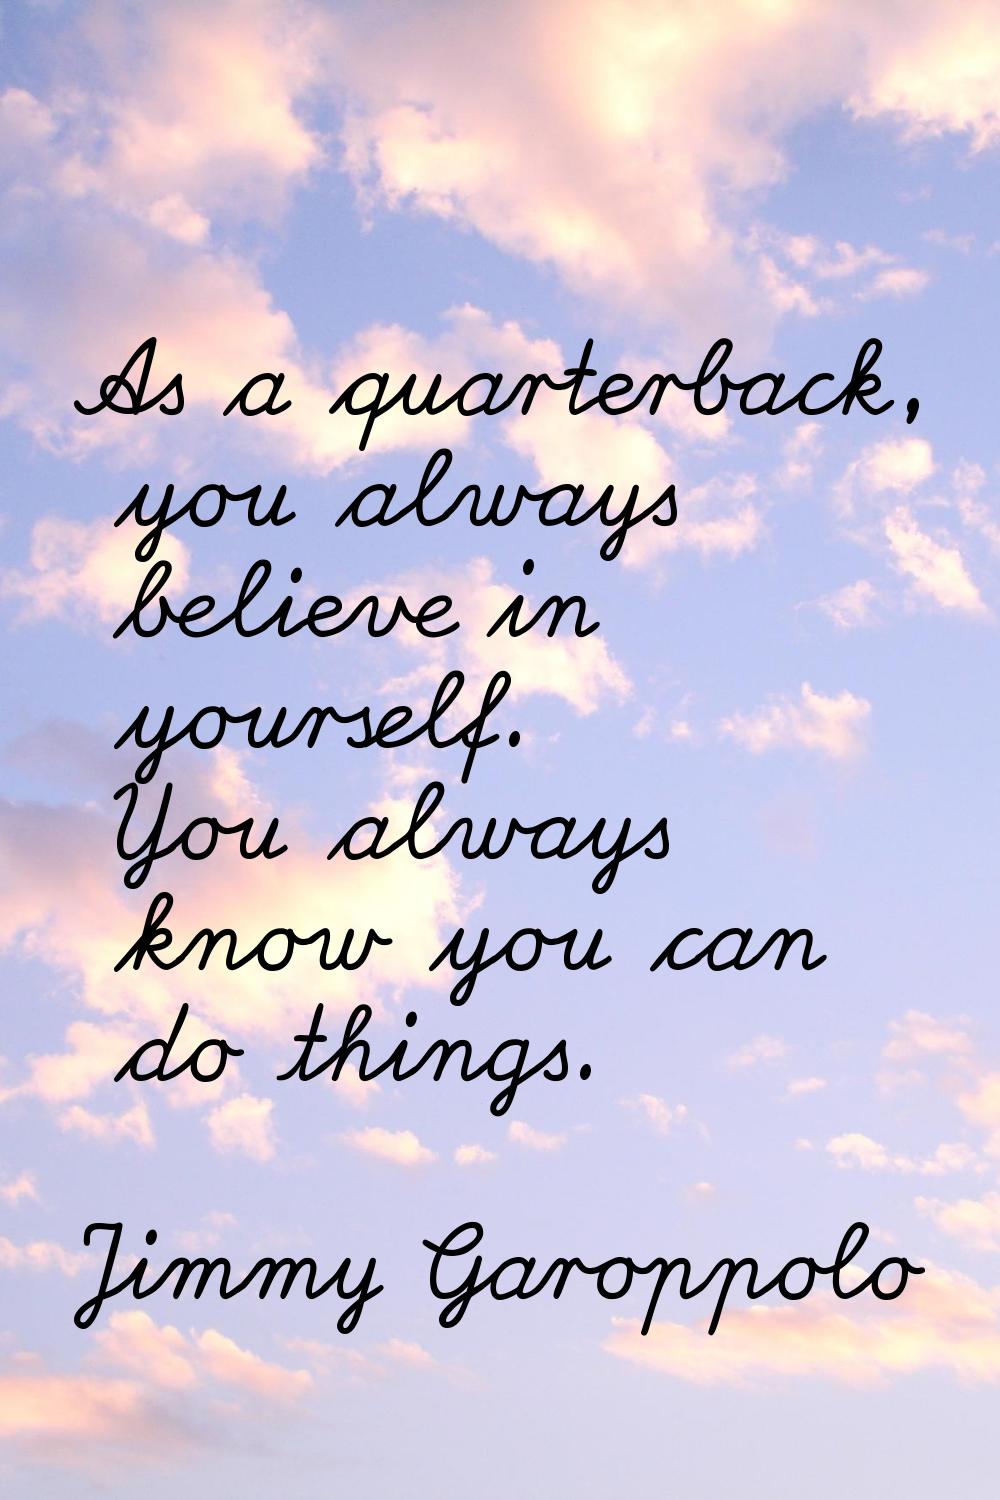 As a quarterback, you always believe in yourself. You always know you can do things.